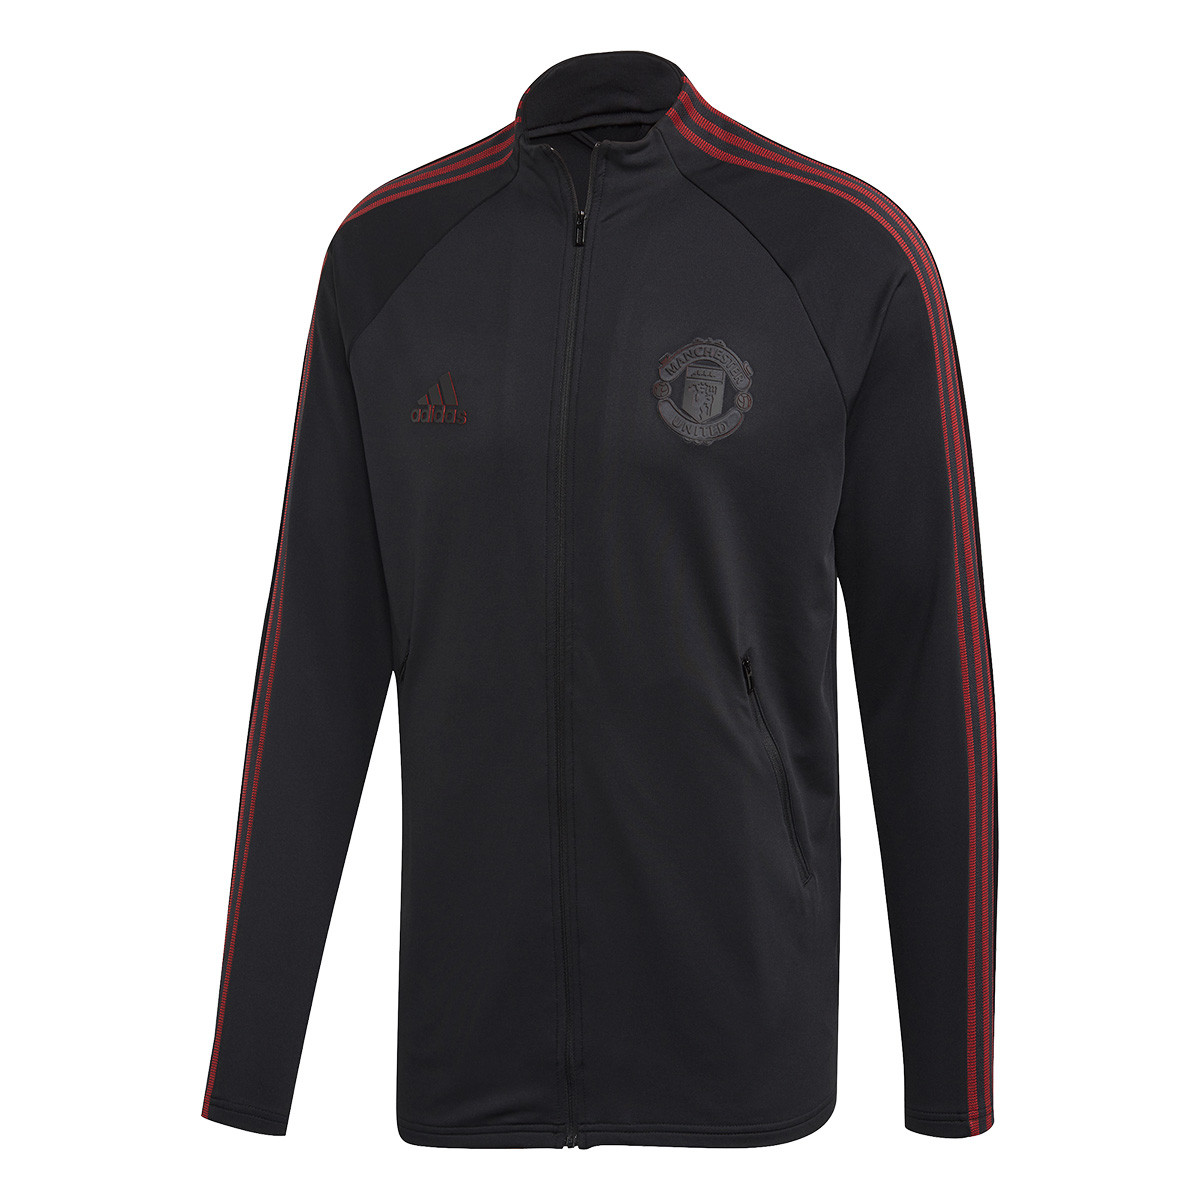 manchester united jacket red